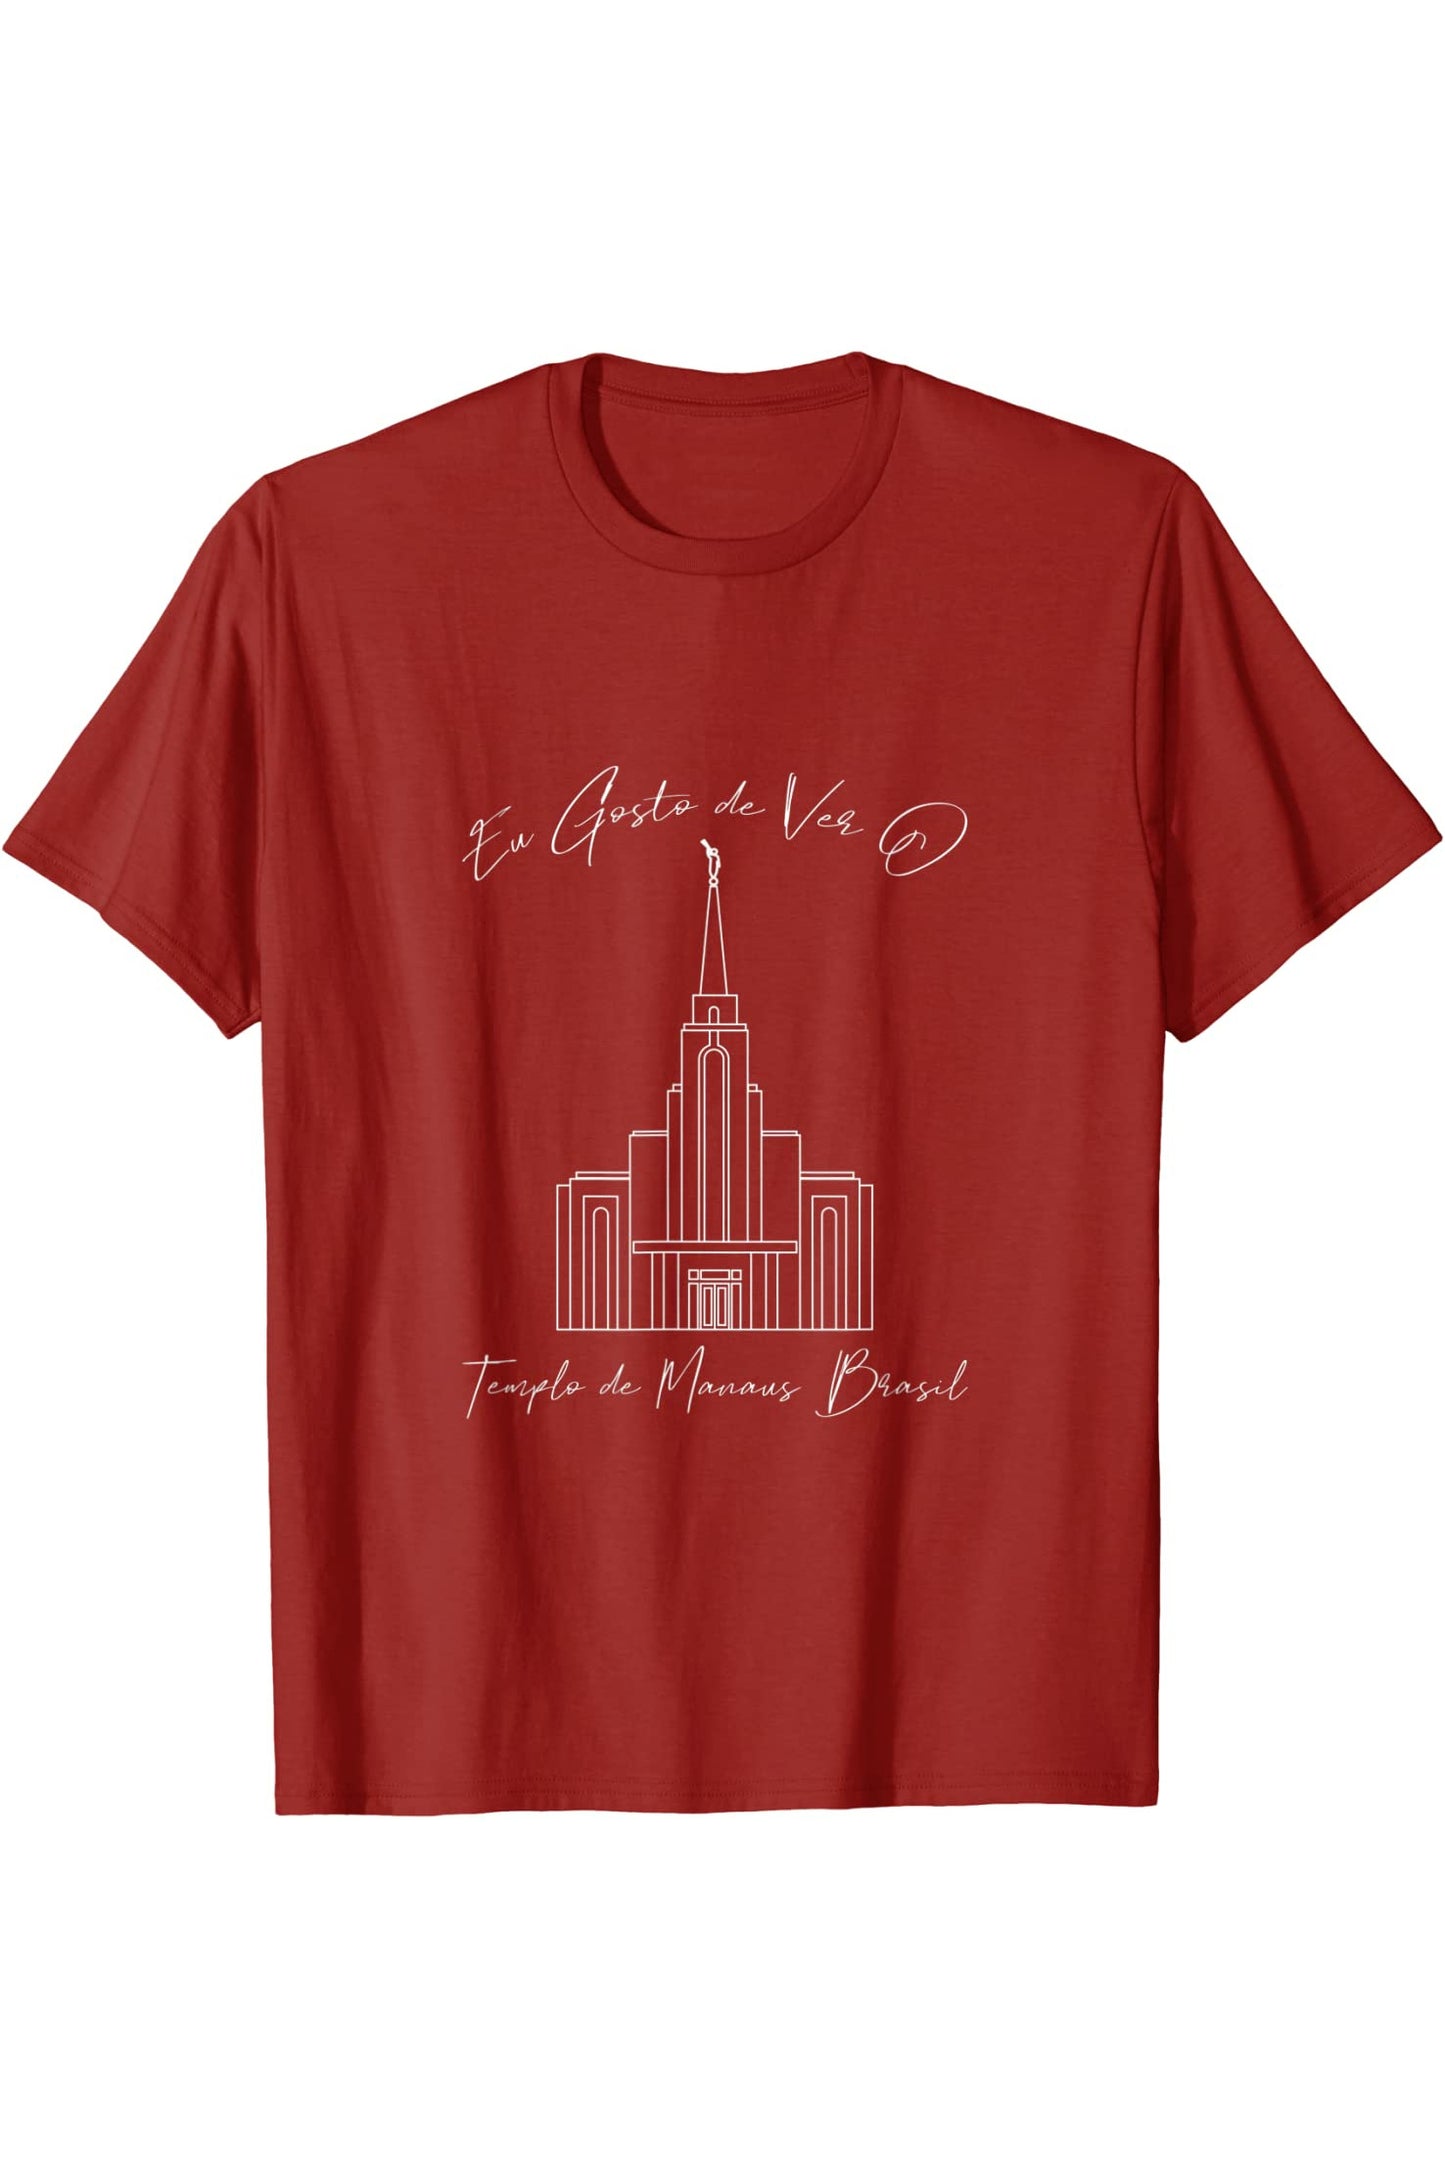 Manaus Brazil Temple T-Shirt - Calligraphy Style (Portuguese) US